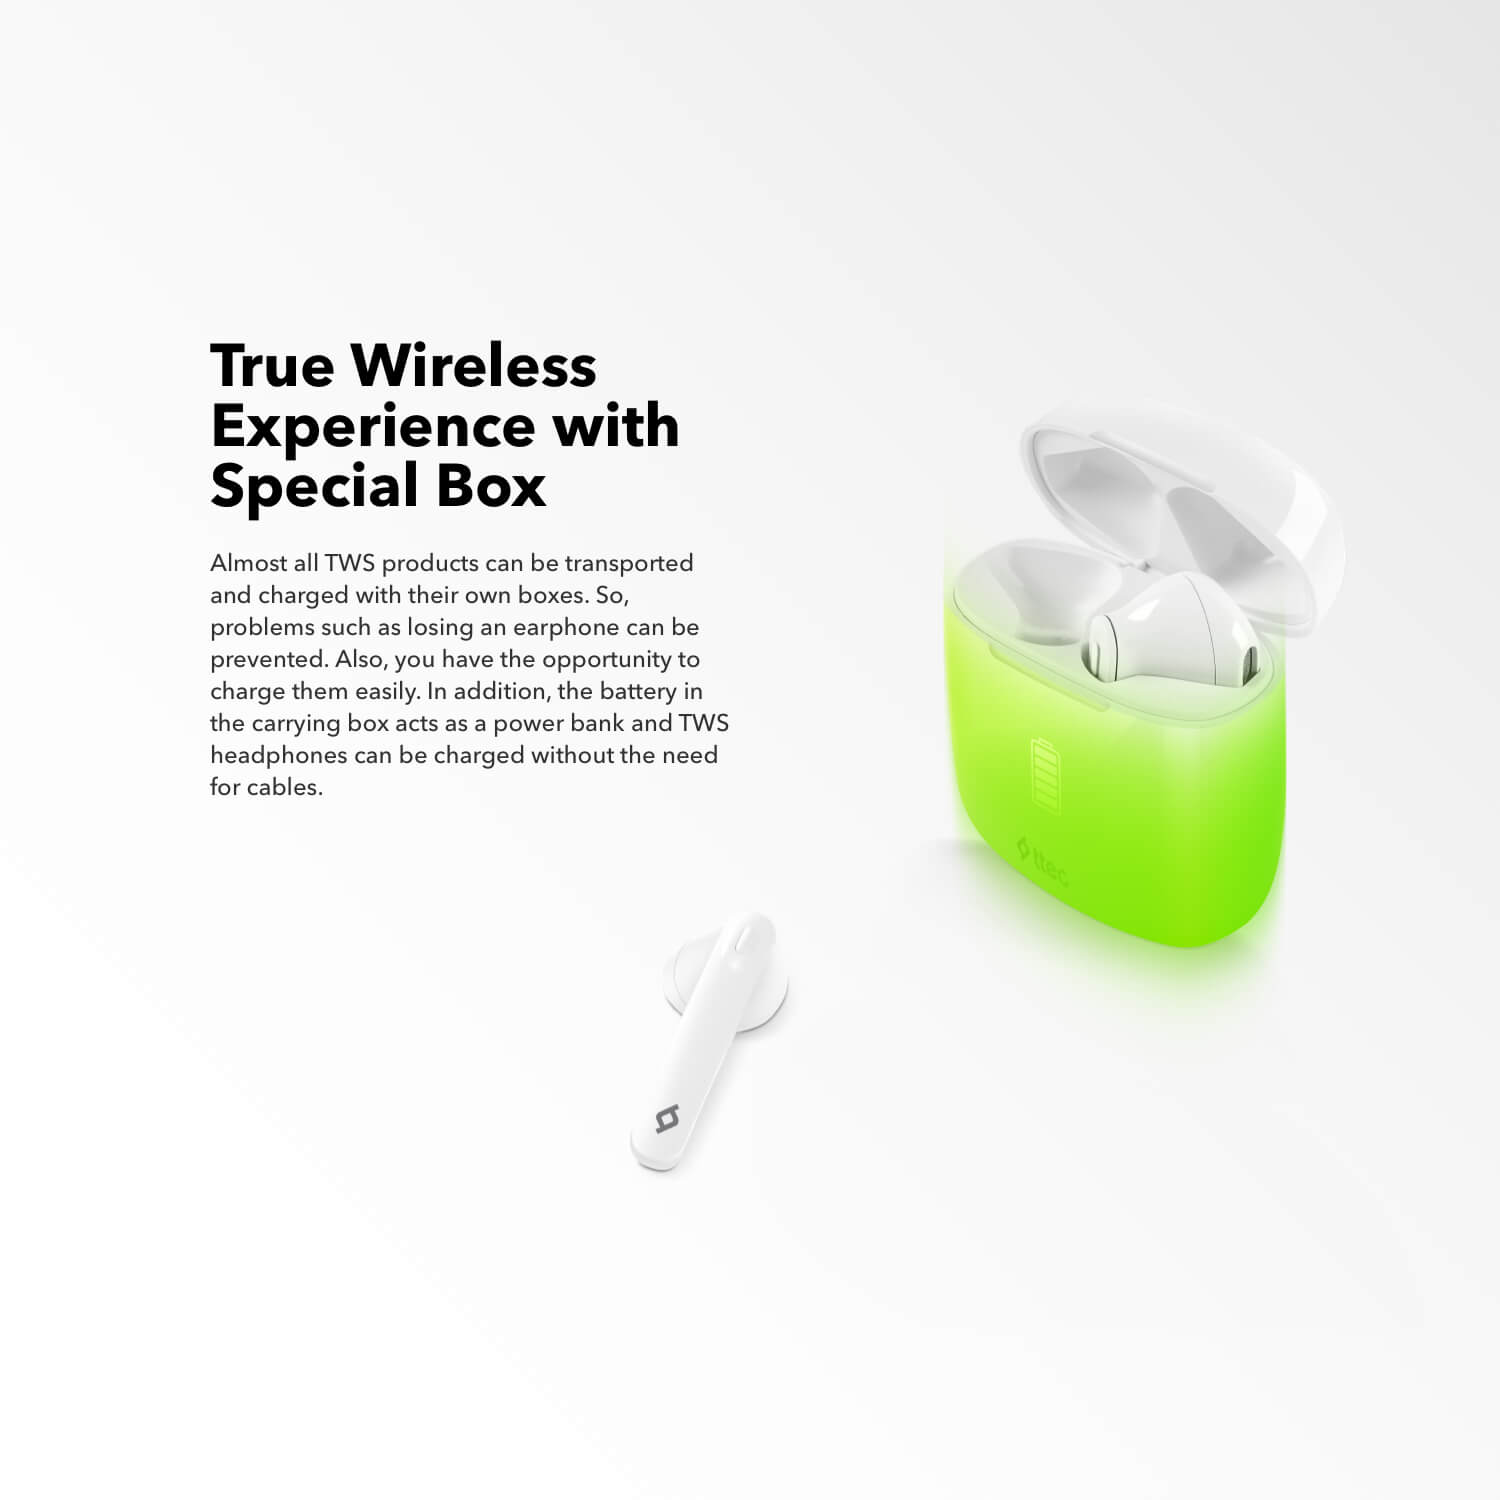 True Wireless Experience with special box